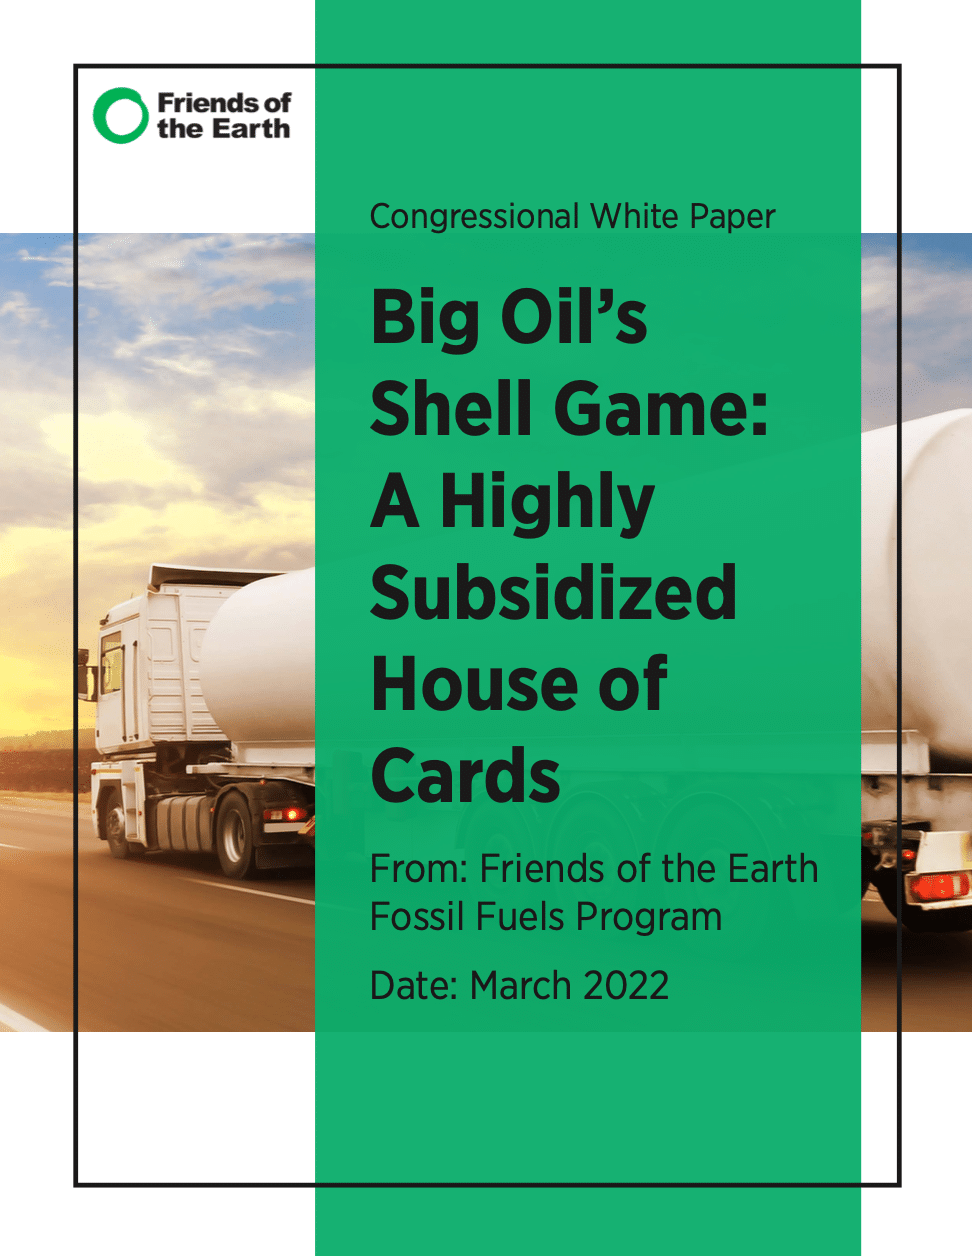 Big Oil’s Shell Game: A Highly Subsidized House of Cards